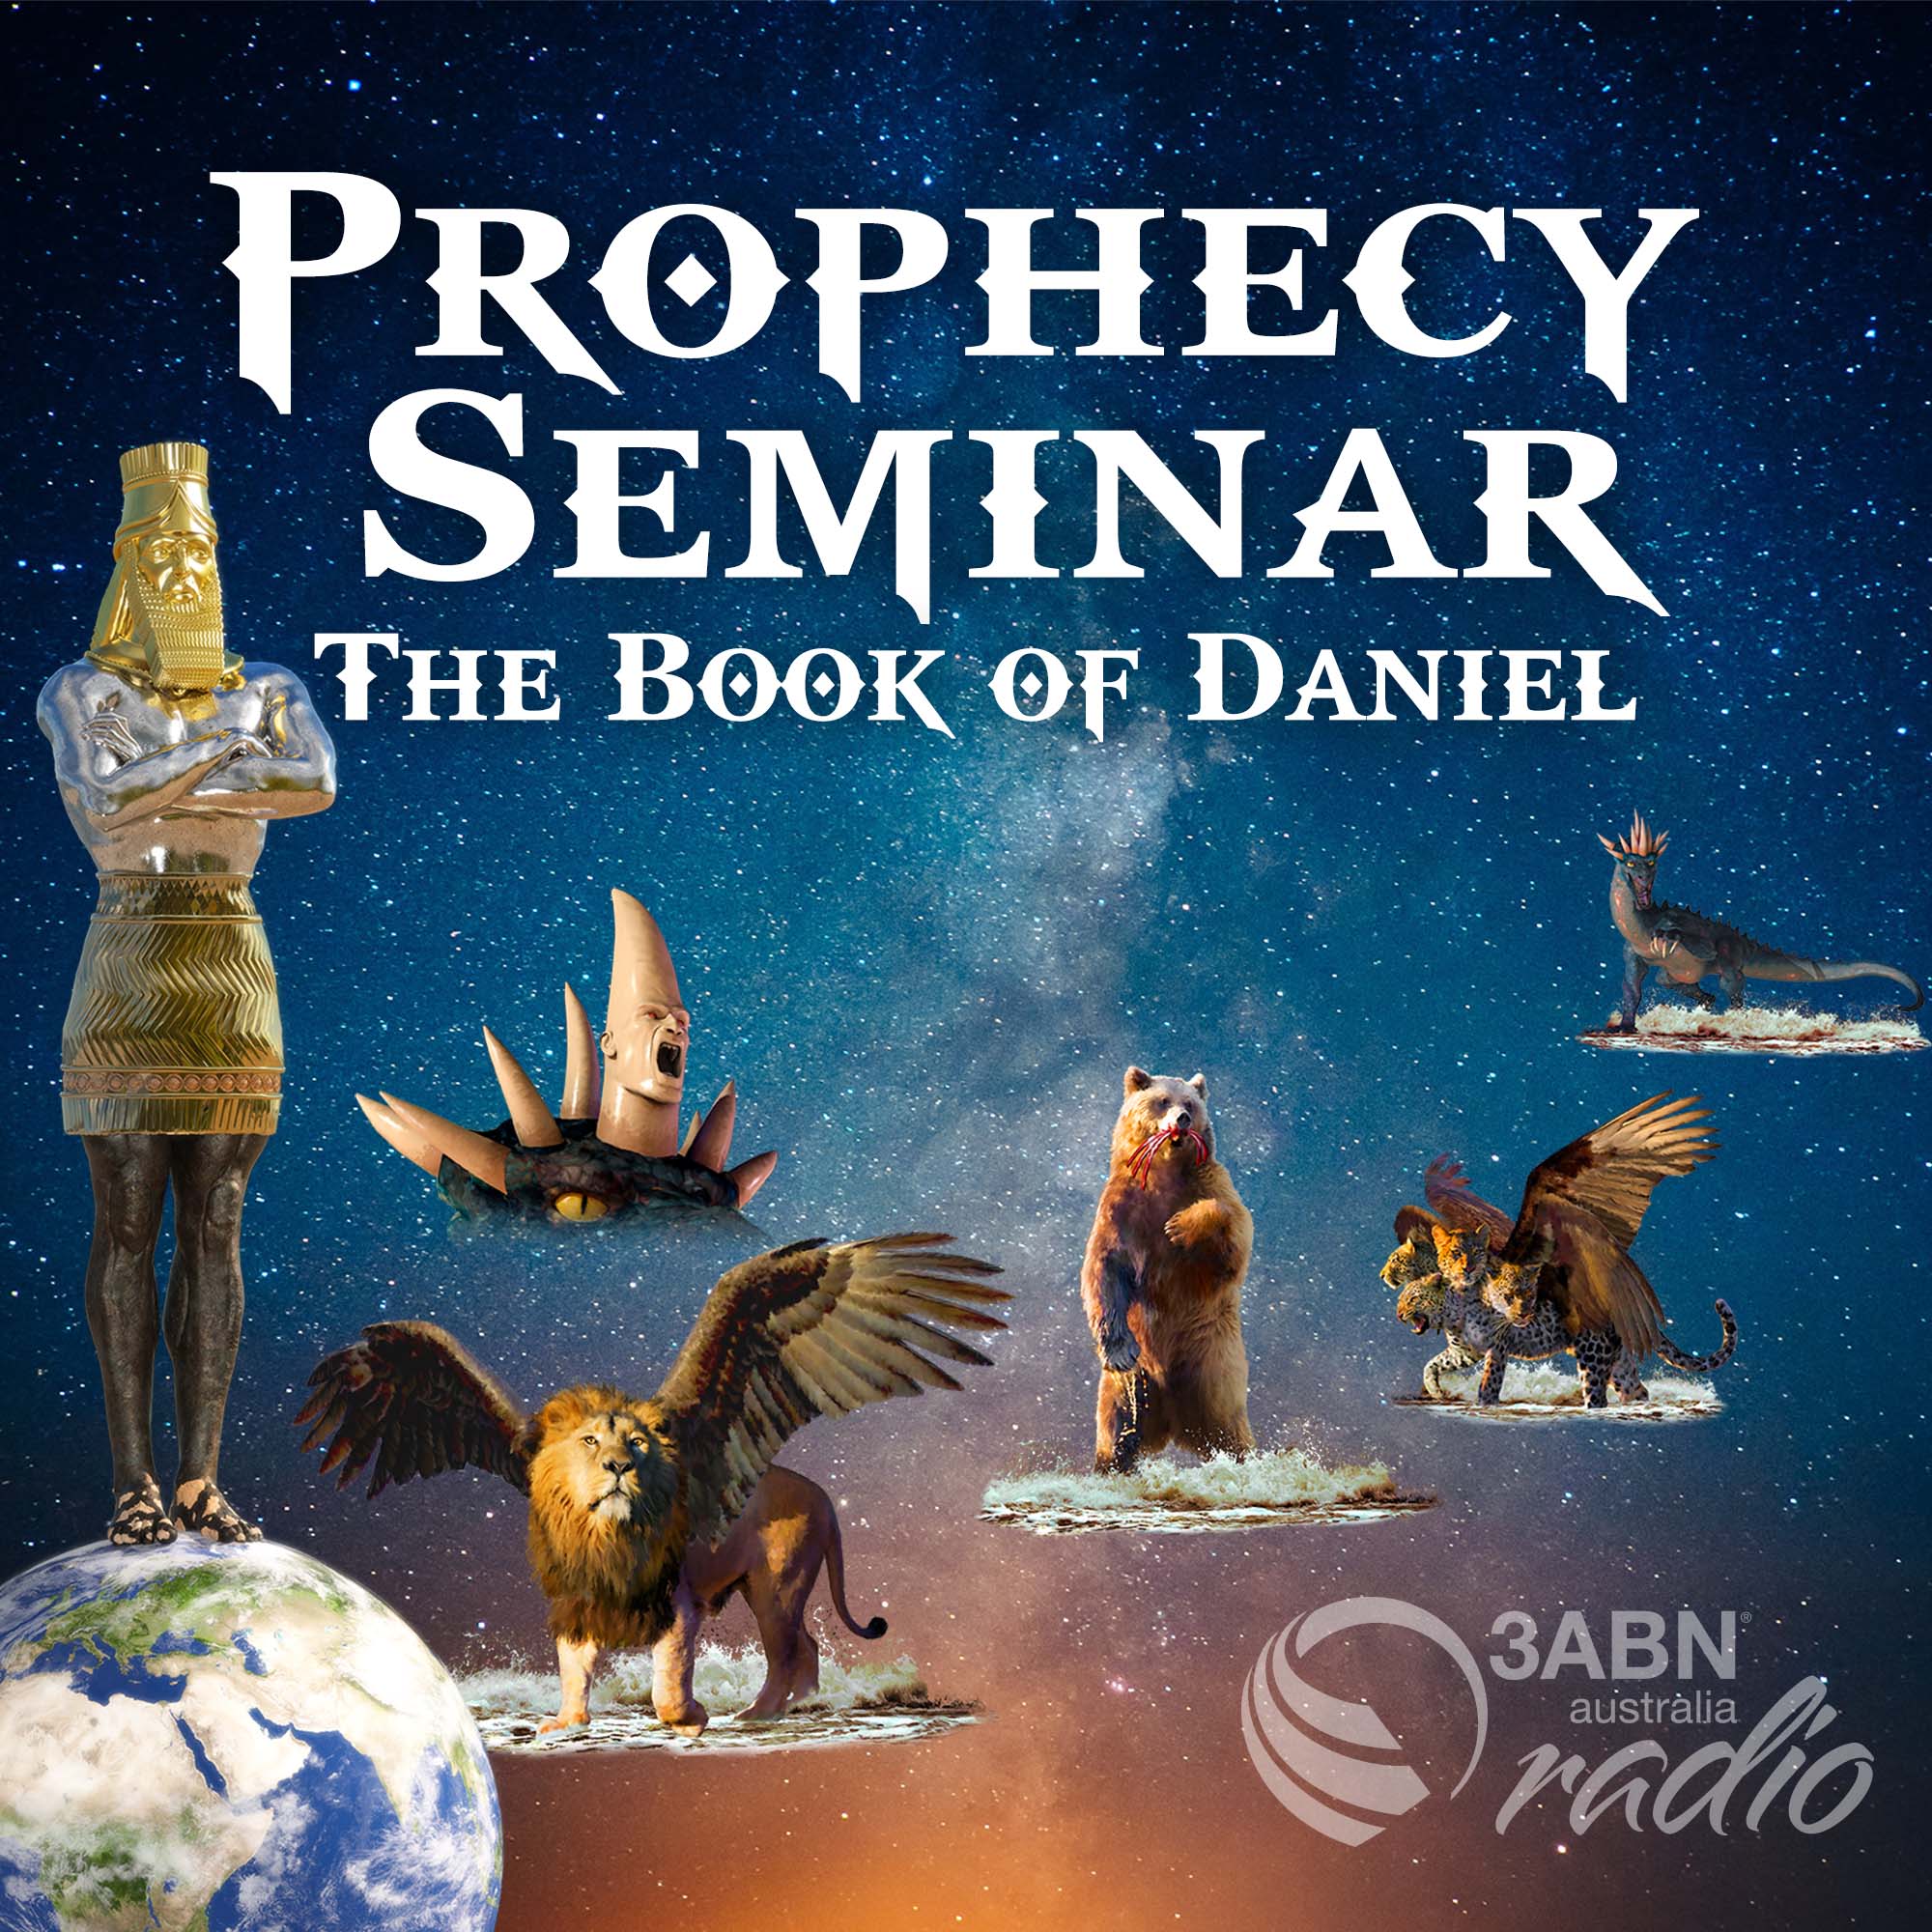 Daniel and the Spirit of Prophecy - PSBD2228